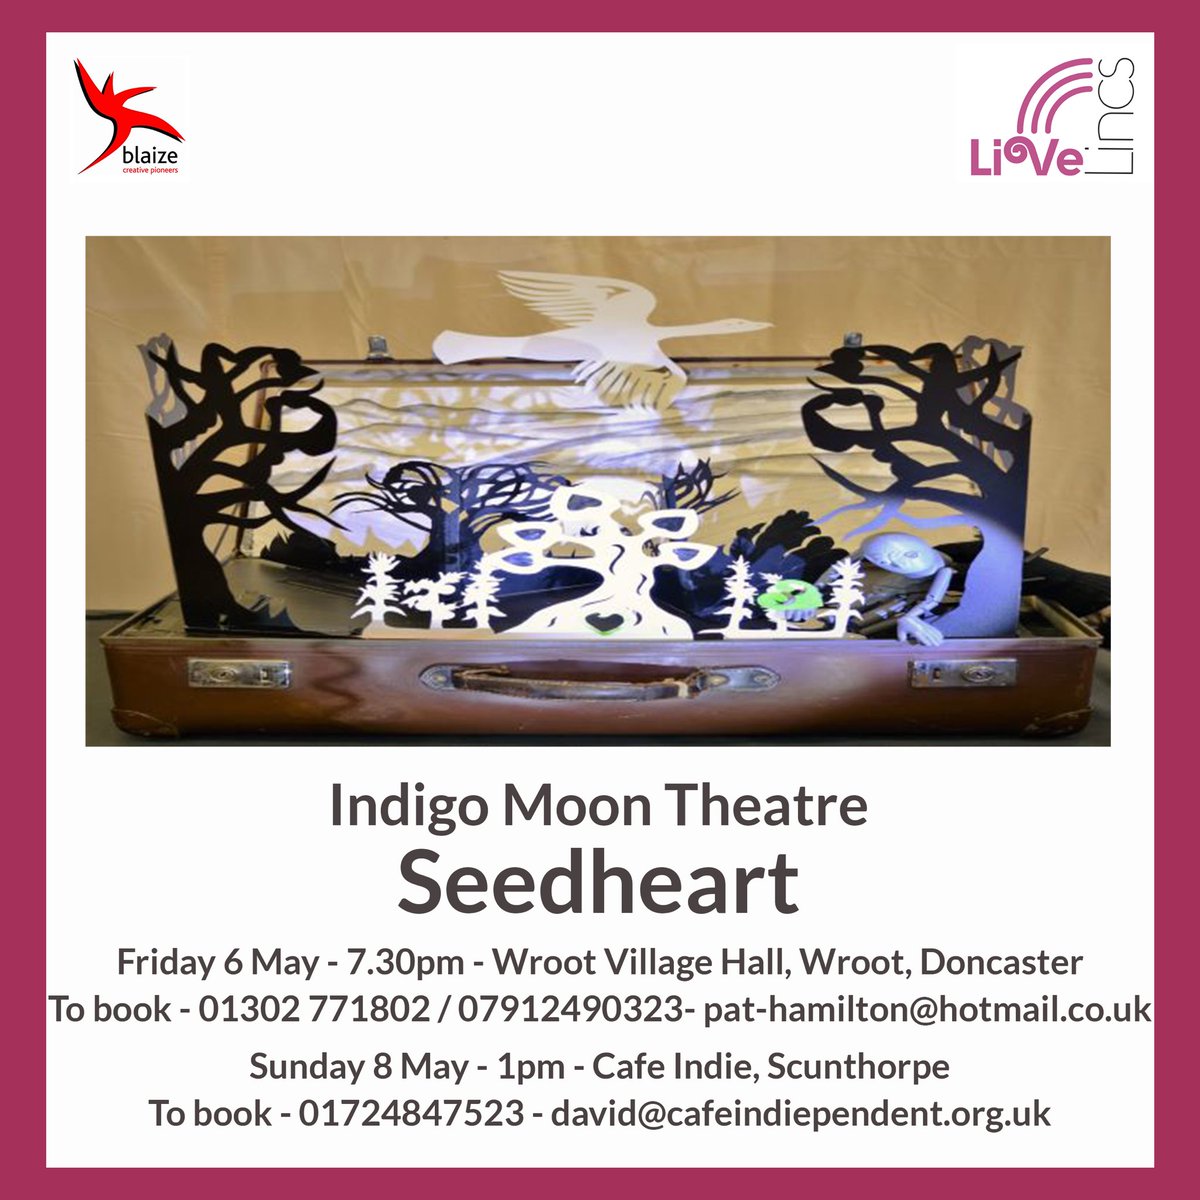 Looking forward to seeing @_Indigo_Moon very soon! 🌝 Book now using the details below 👇 @Ruraltouring @ACRE_national #ruraltouring